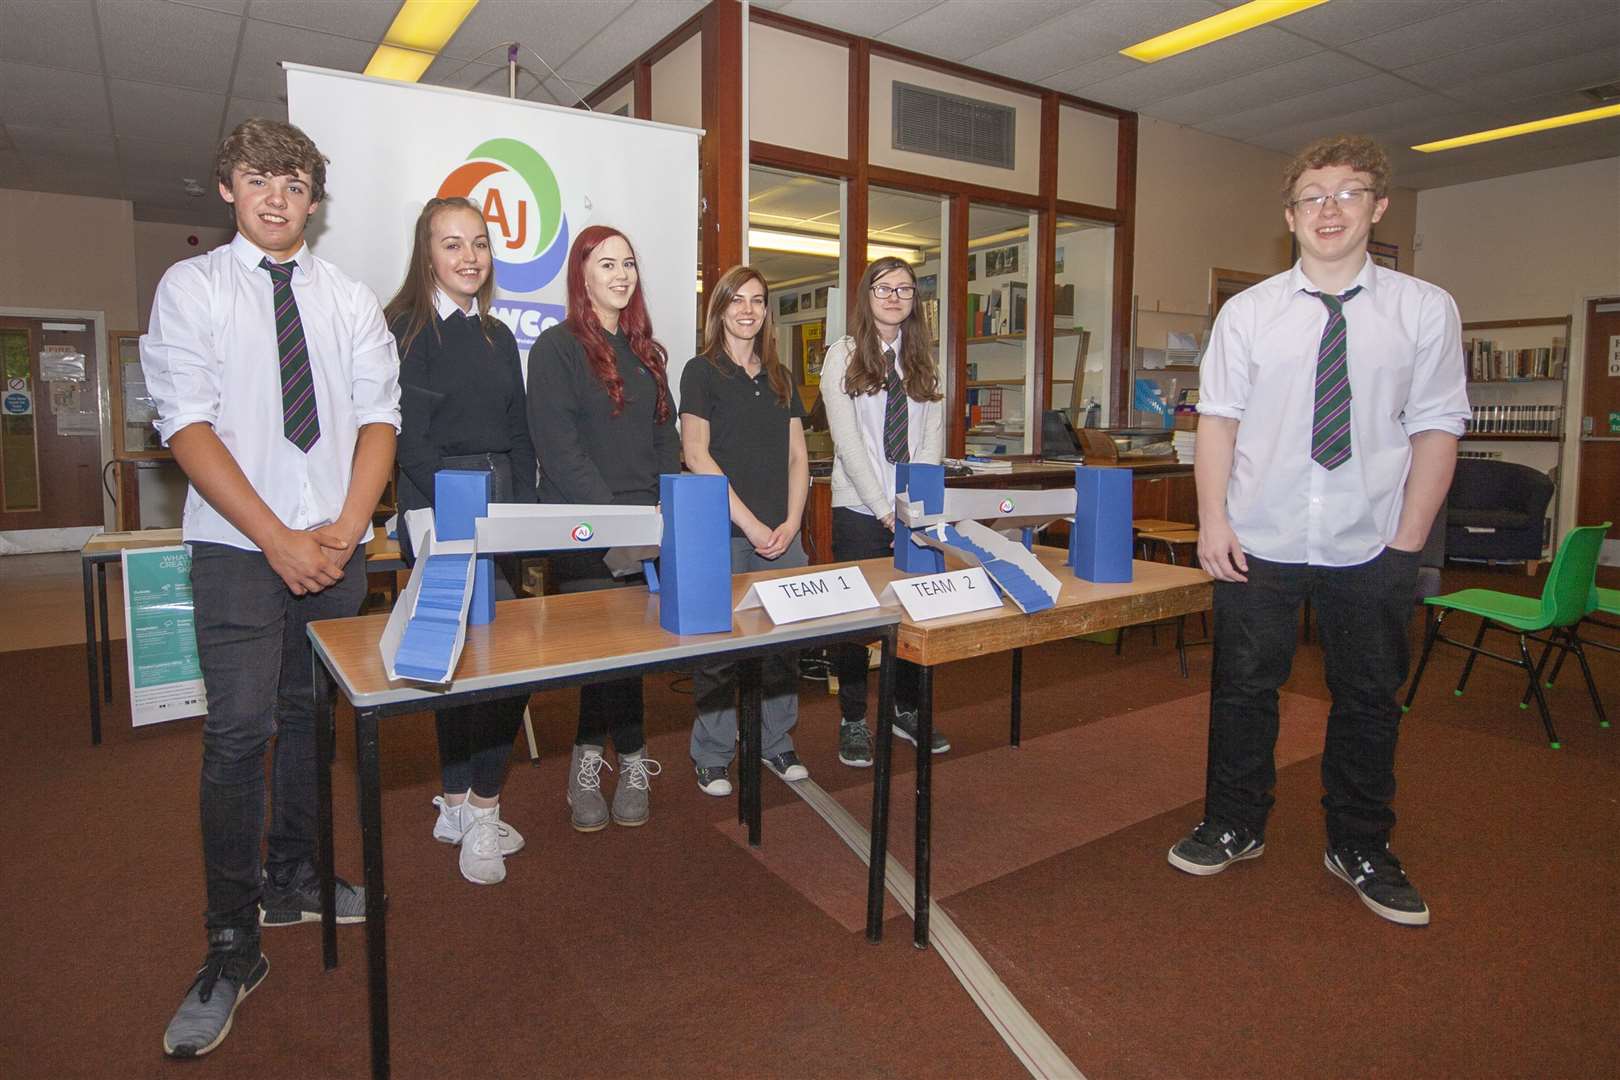 Sponsor of the secondary school teacher award, AJ Engineering, regularly works with schools including this previous project with pupils from Forres Academy. Centre are former graduate apprentice Laura Mair and quality manager Jazmin Kellas.